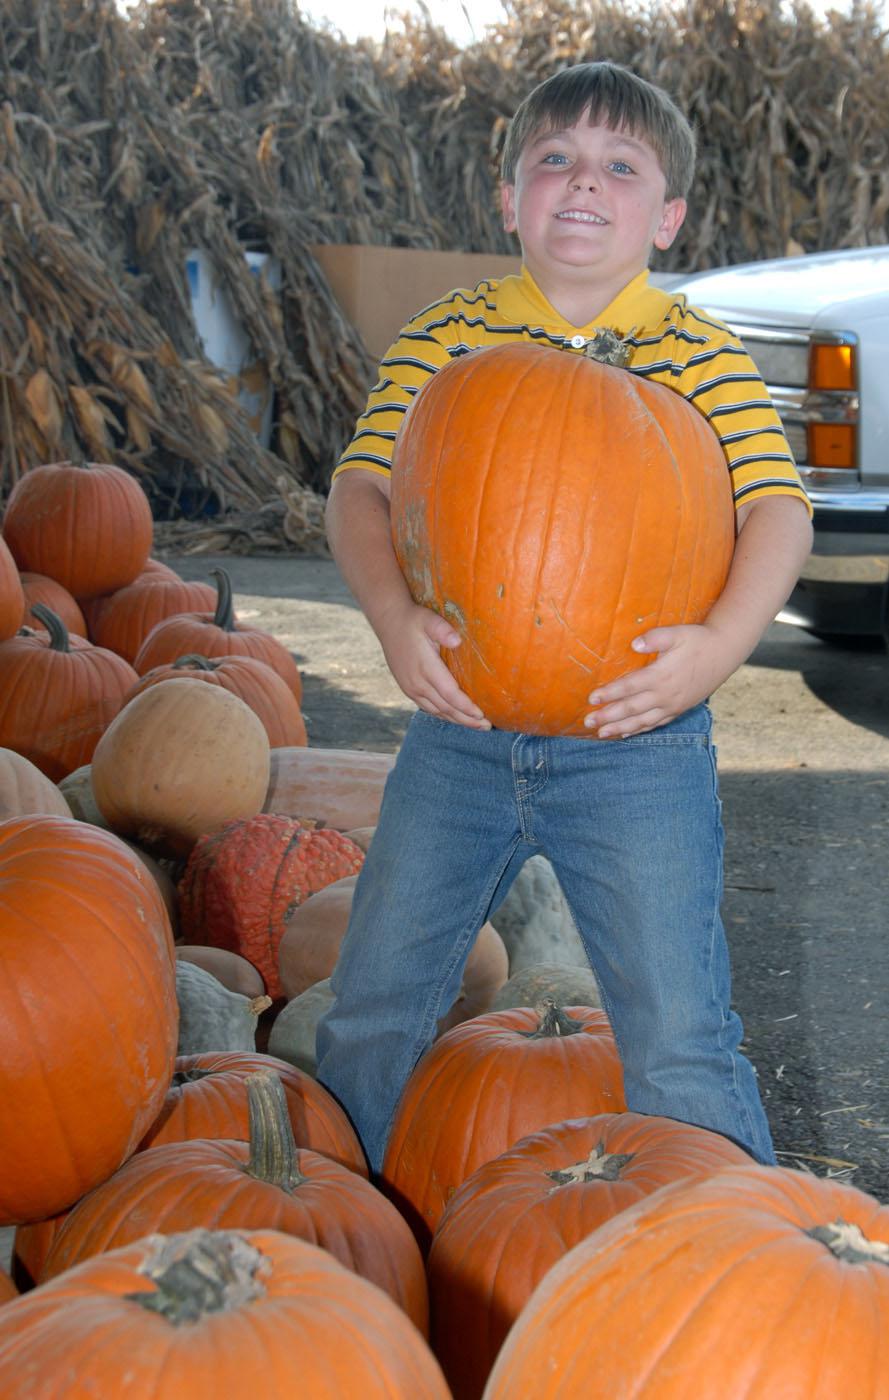 Clayton Salmons picks out a pumpkin for his jack-o-lantern at Fresh-Way Produce in Ridgeland. (Photo by Jim Lytle)